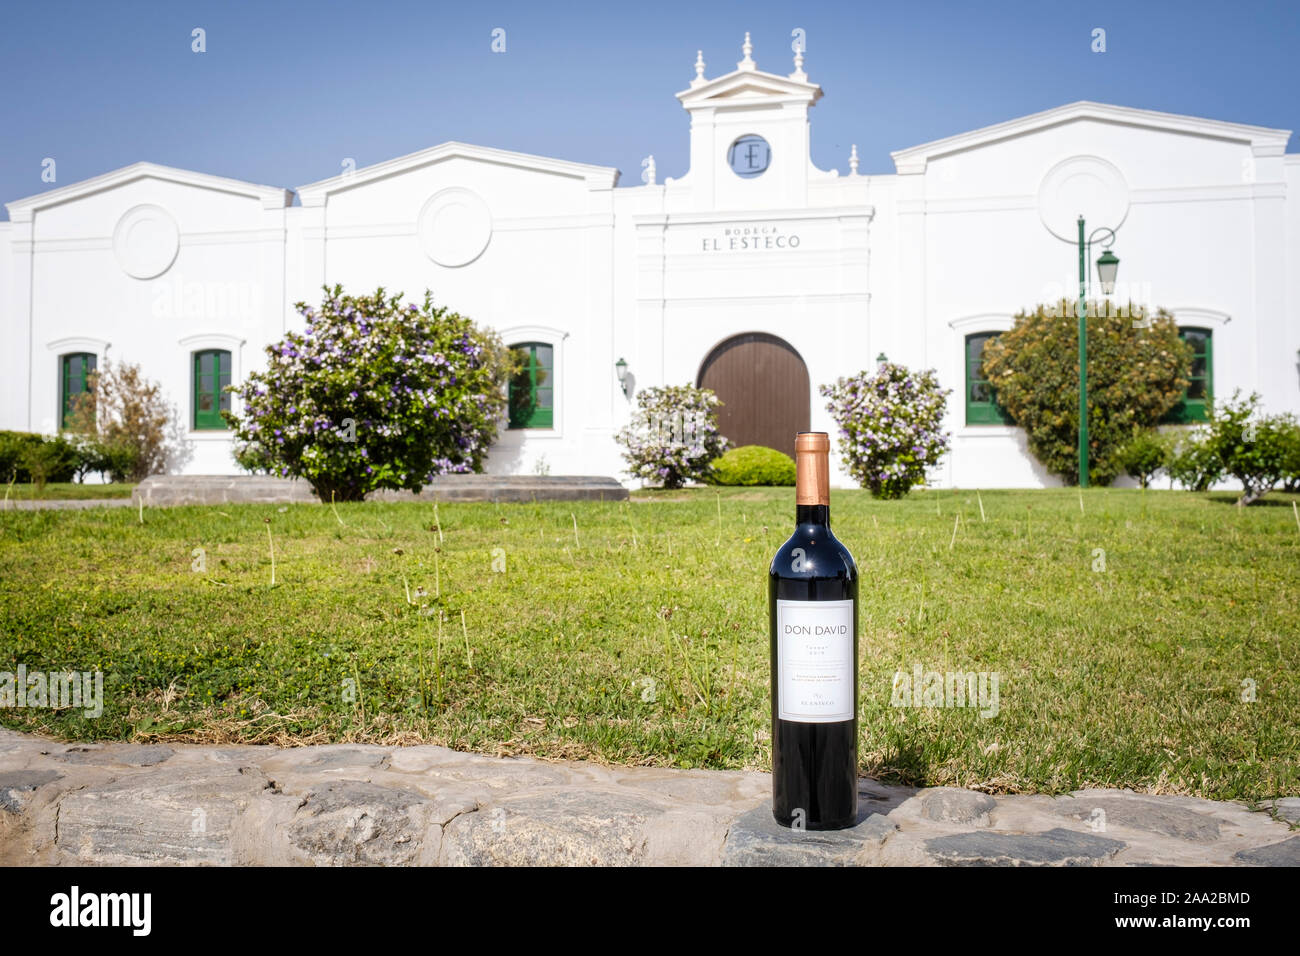 Don David red wine bottle with the Bodega El Esteco (Winery Estate) characteristic main building in the background in Cafayate, Argentina Stock Photo